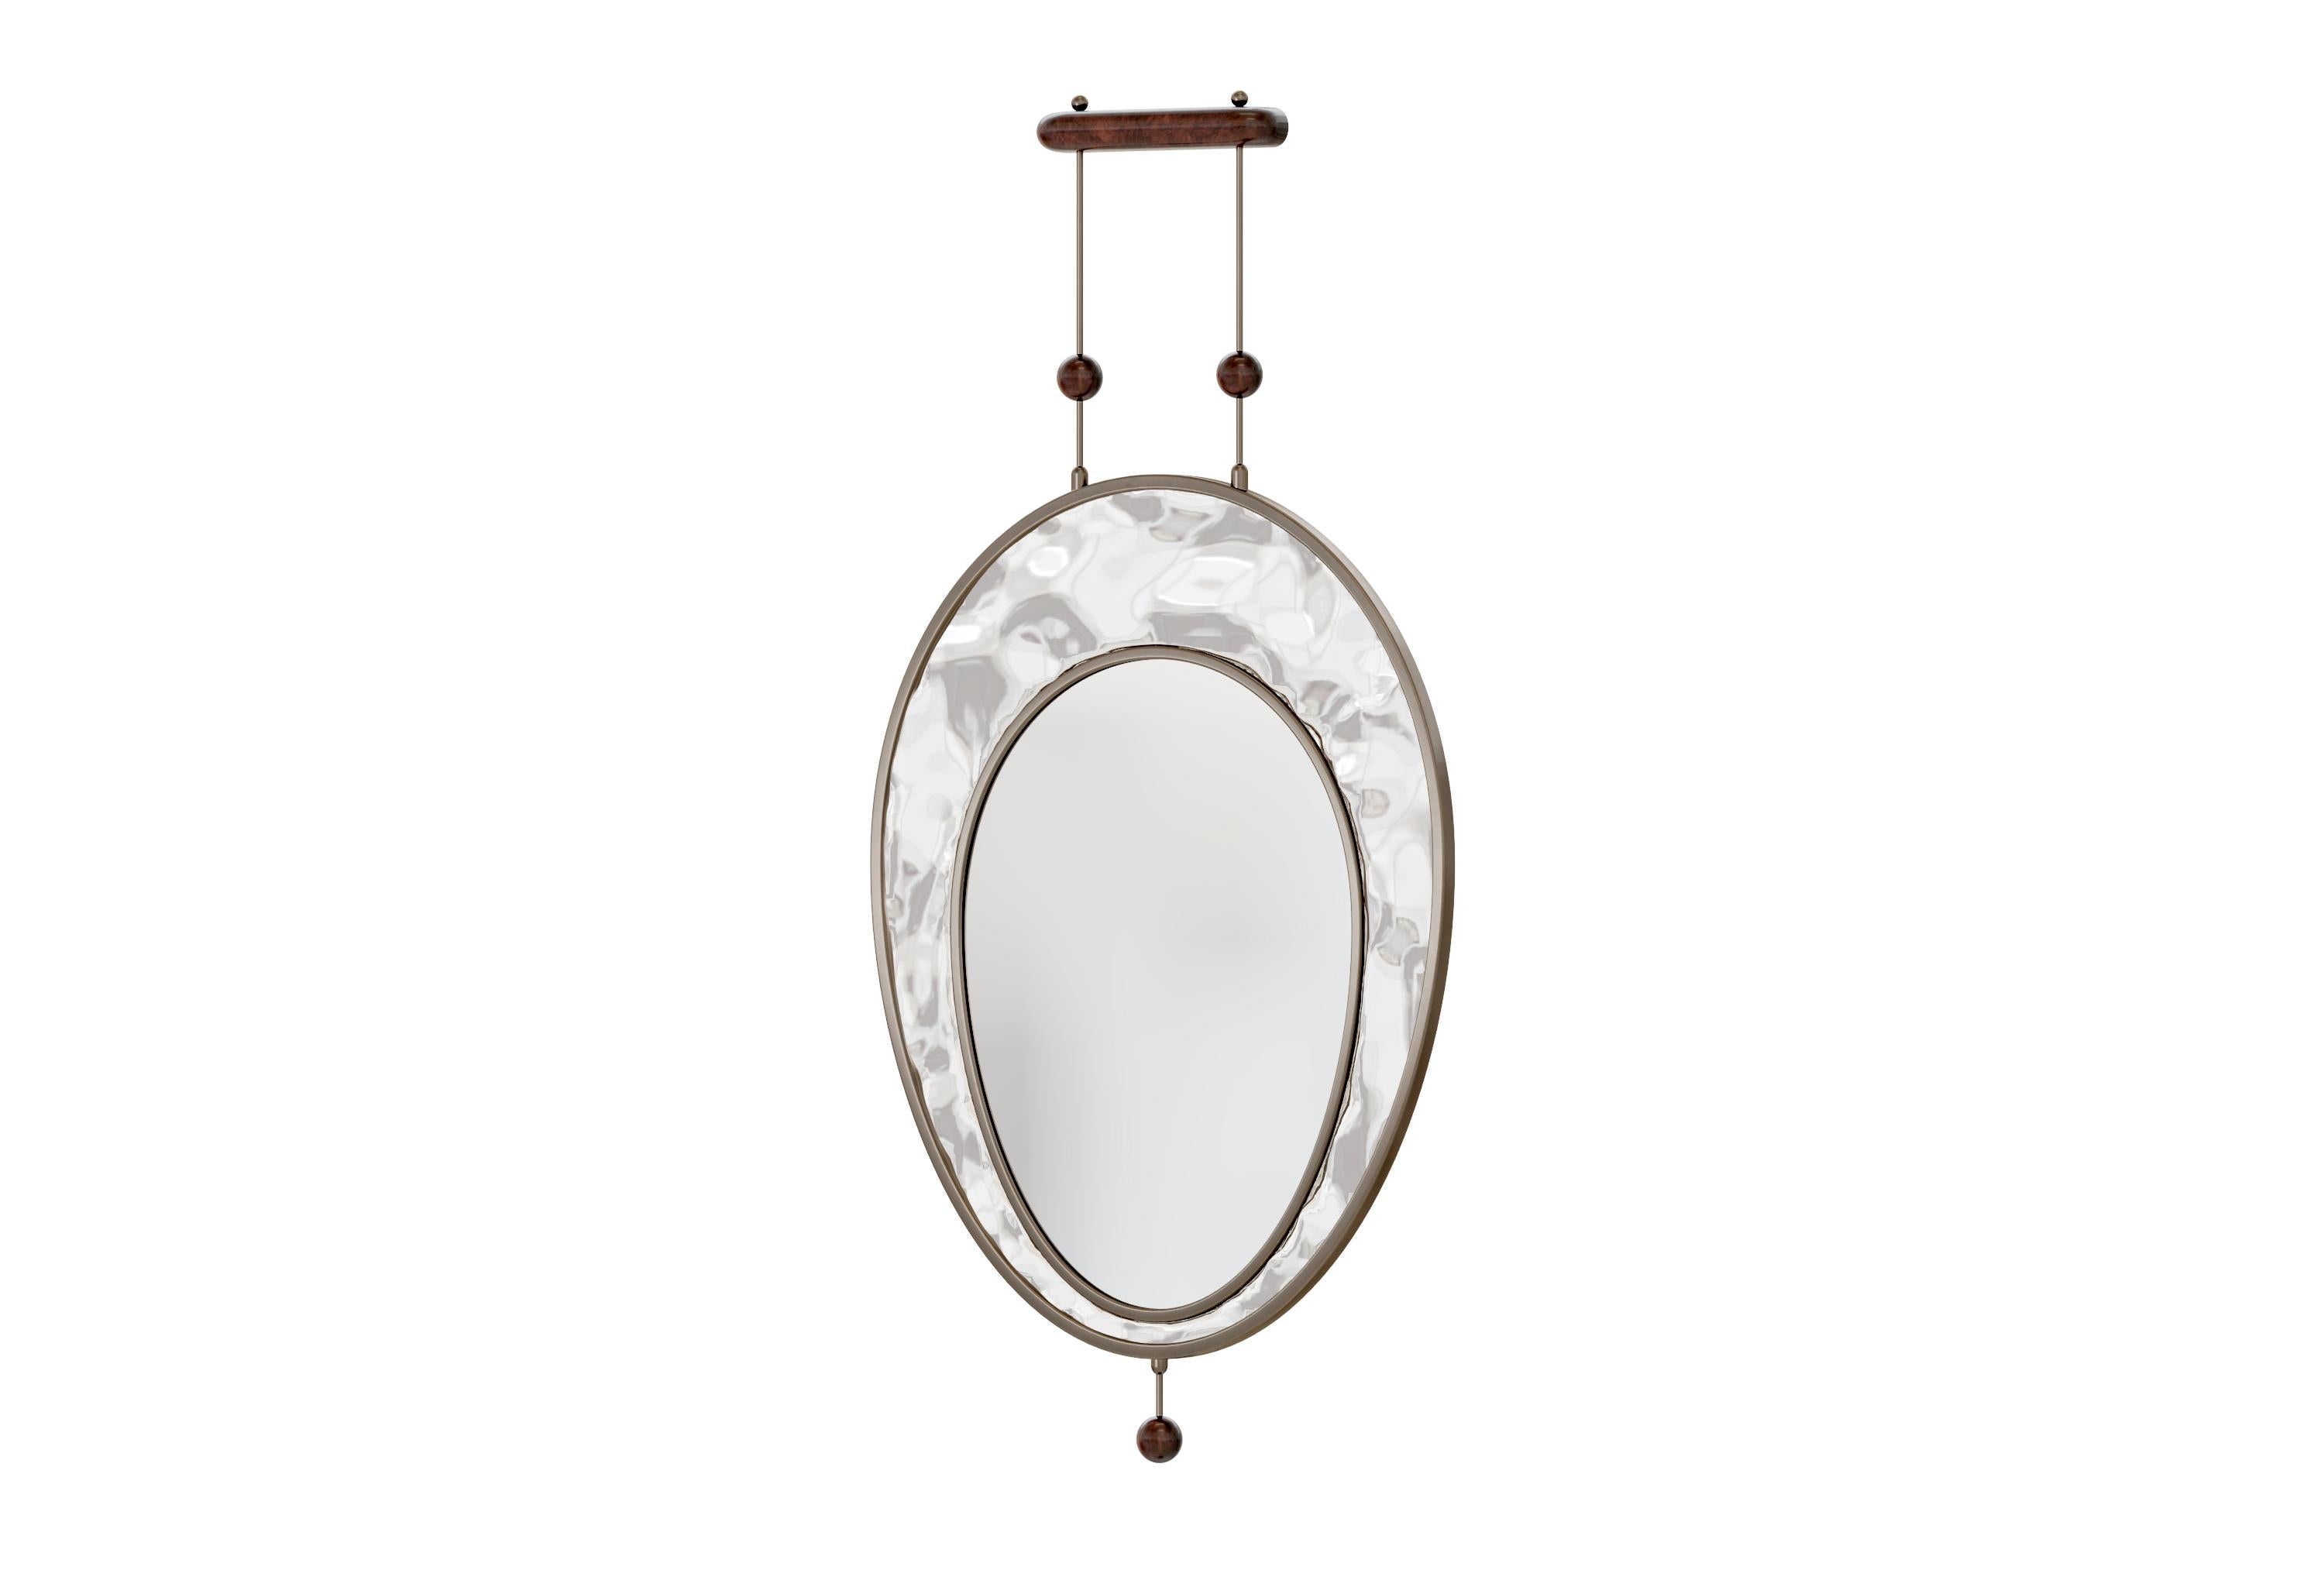 European Cameo Modern Luxury Wall Mirror with Metal Frame and Marble Decorative Elements For Sale